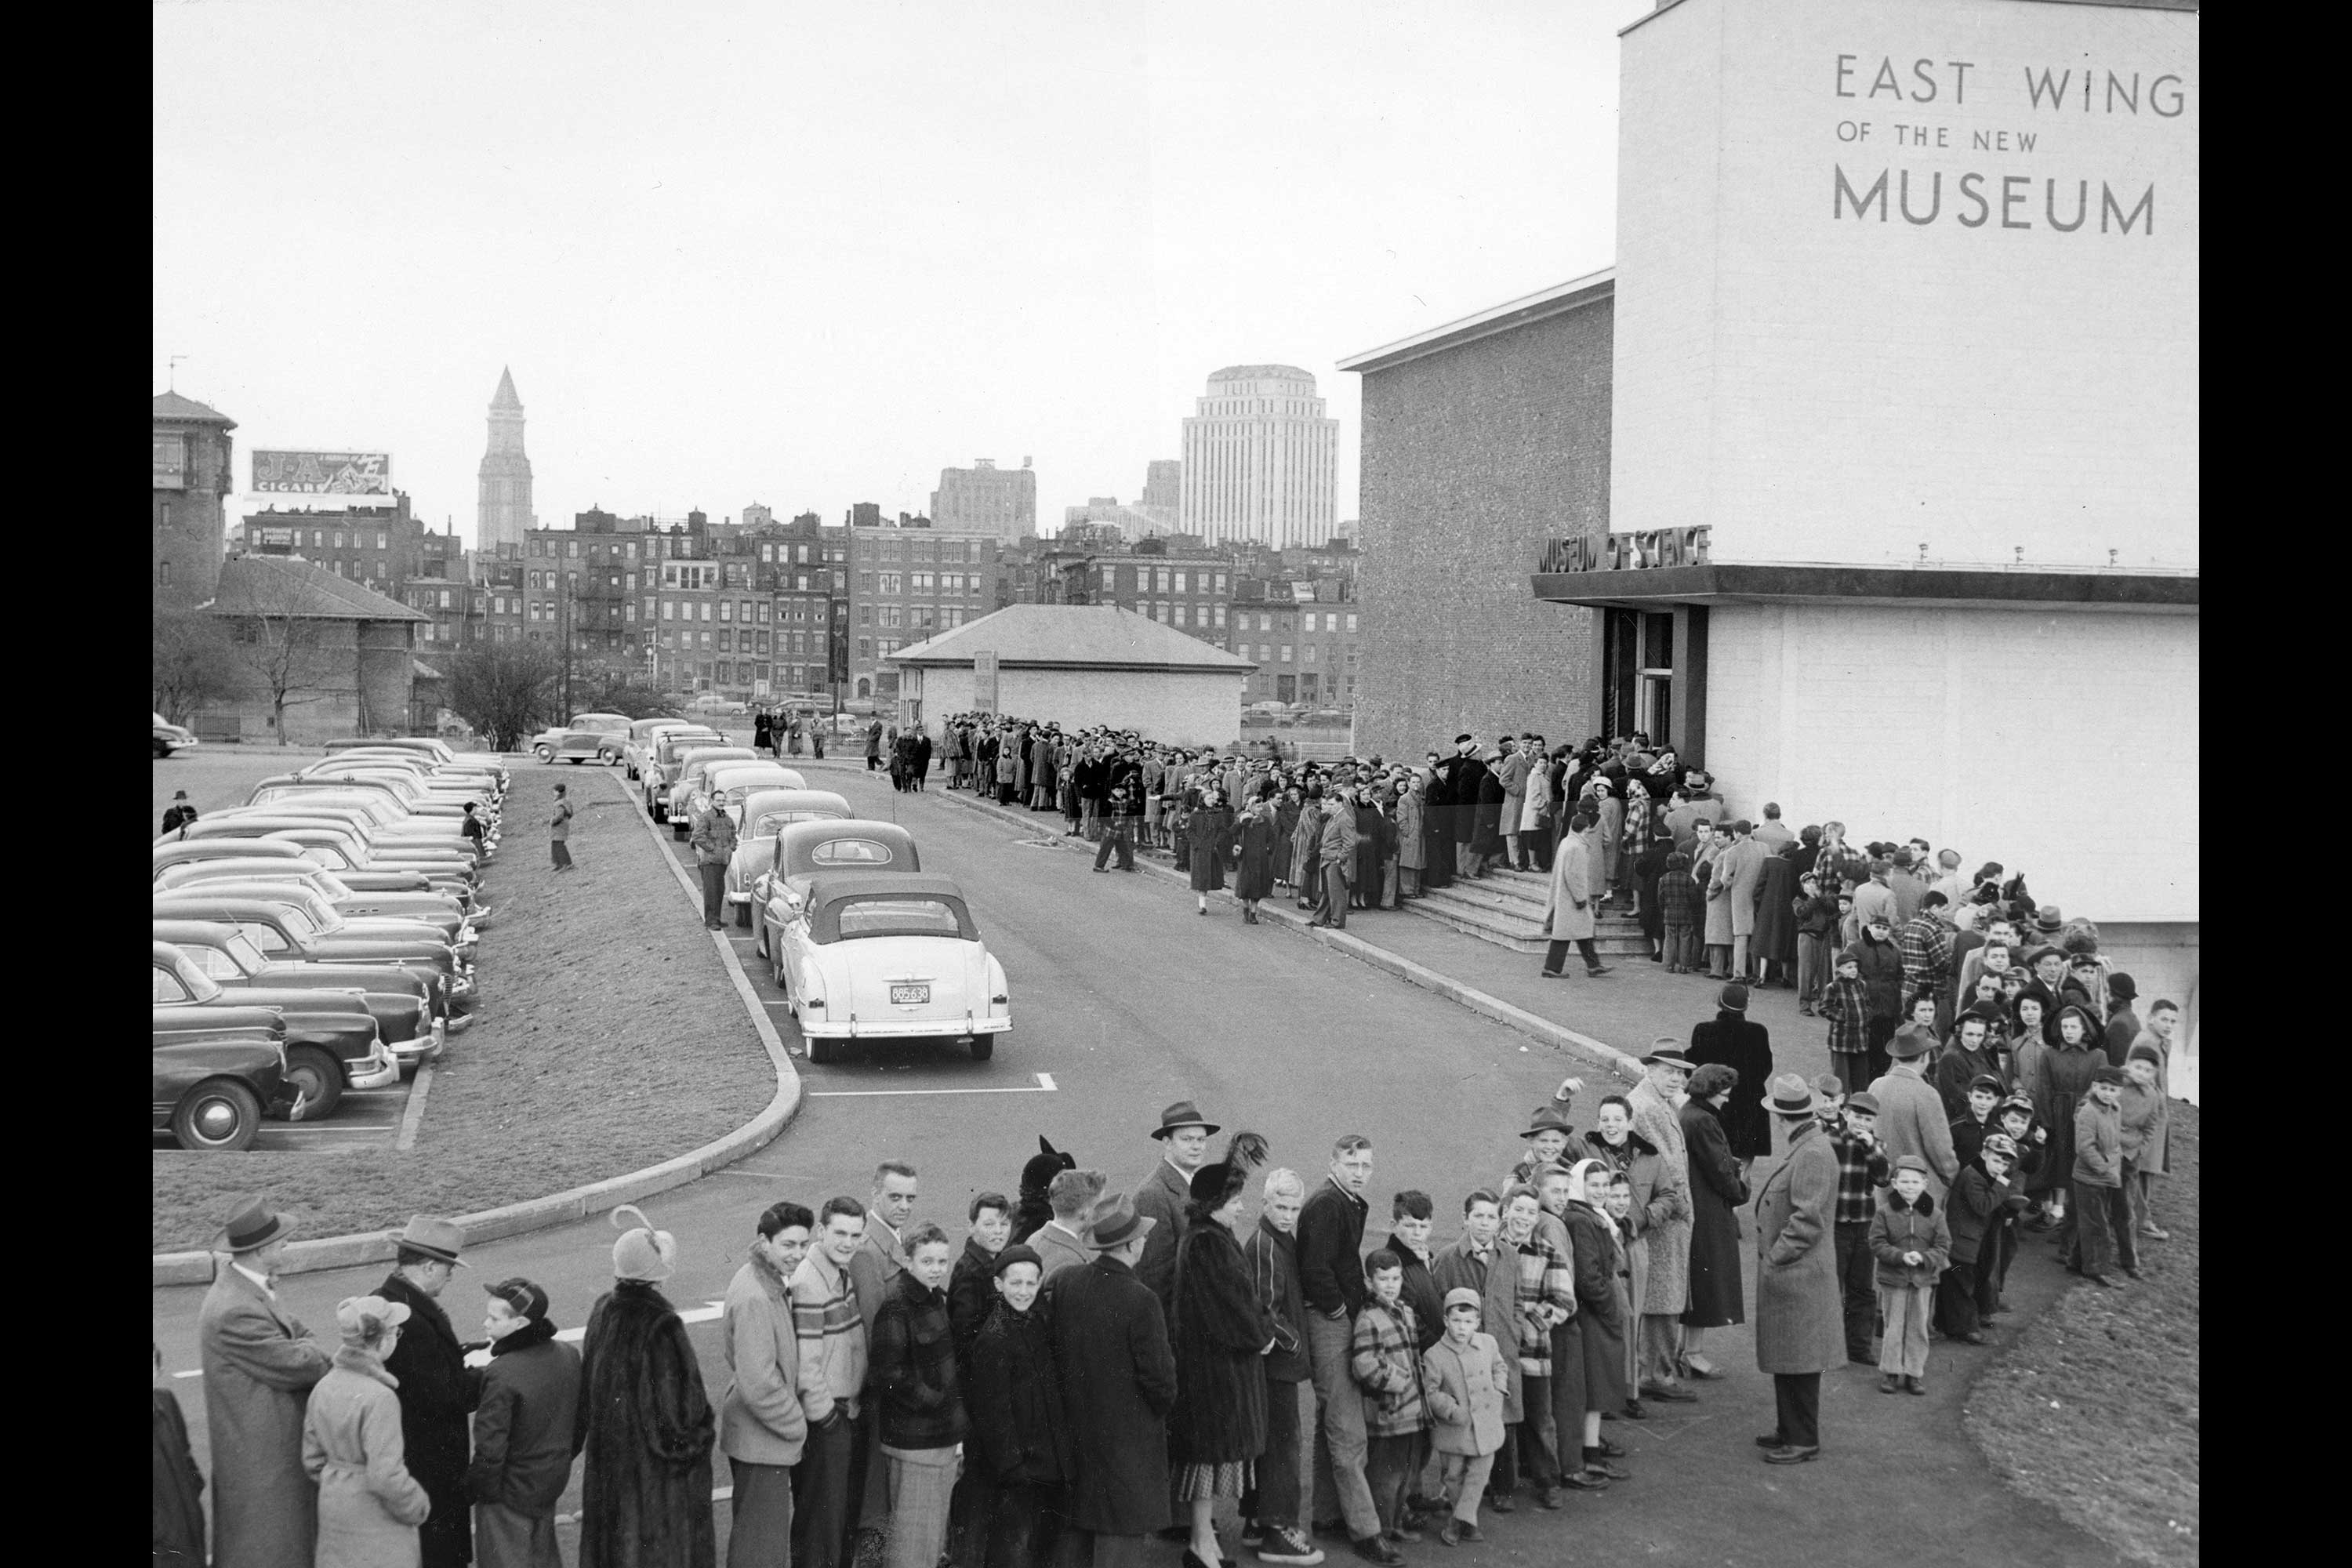 Museum Opening Day 1951. This is a photograph of a crowd of people waiting in line in front of the first Museum building.